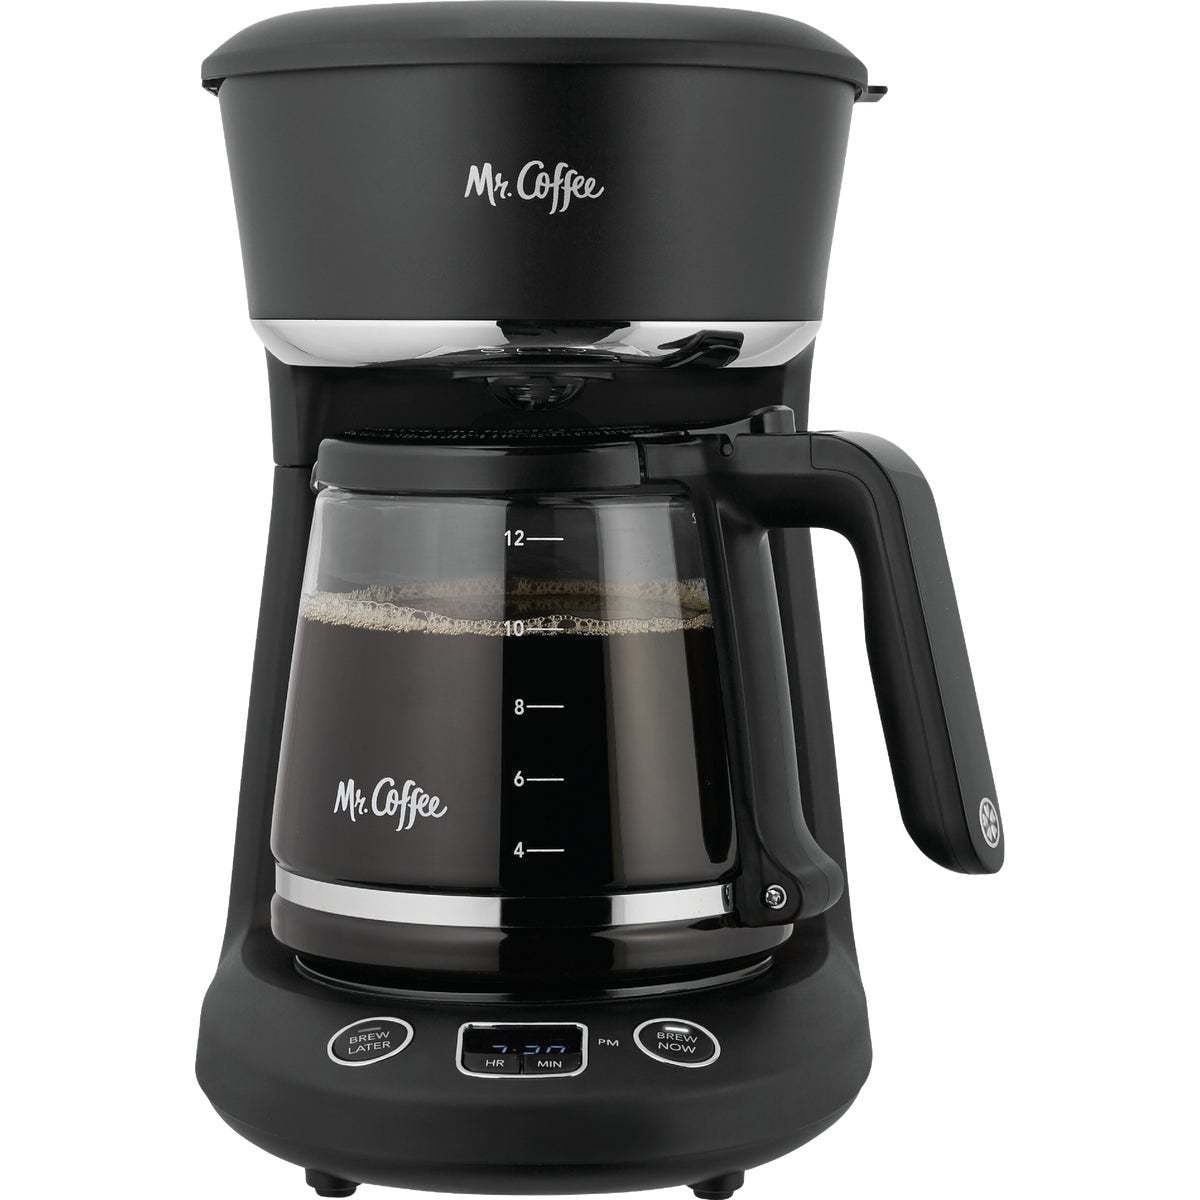 https://ak1.ostkcdn.com/images/products/is/images/direct/f05ab551f967323997803e80803b065bd5e88558/Mr-Coffee-12-Cup-Coffee-Maker-in-Black-and-Chrome---1-Each.jpg